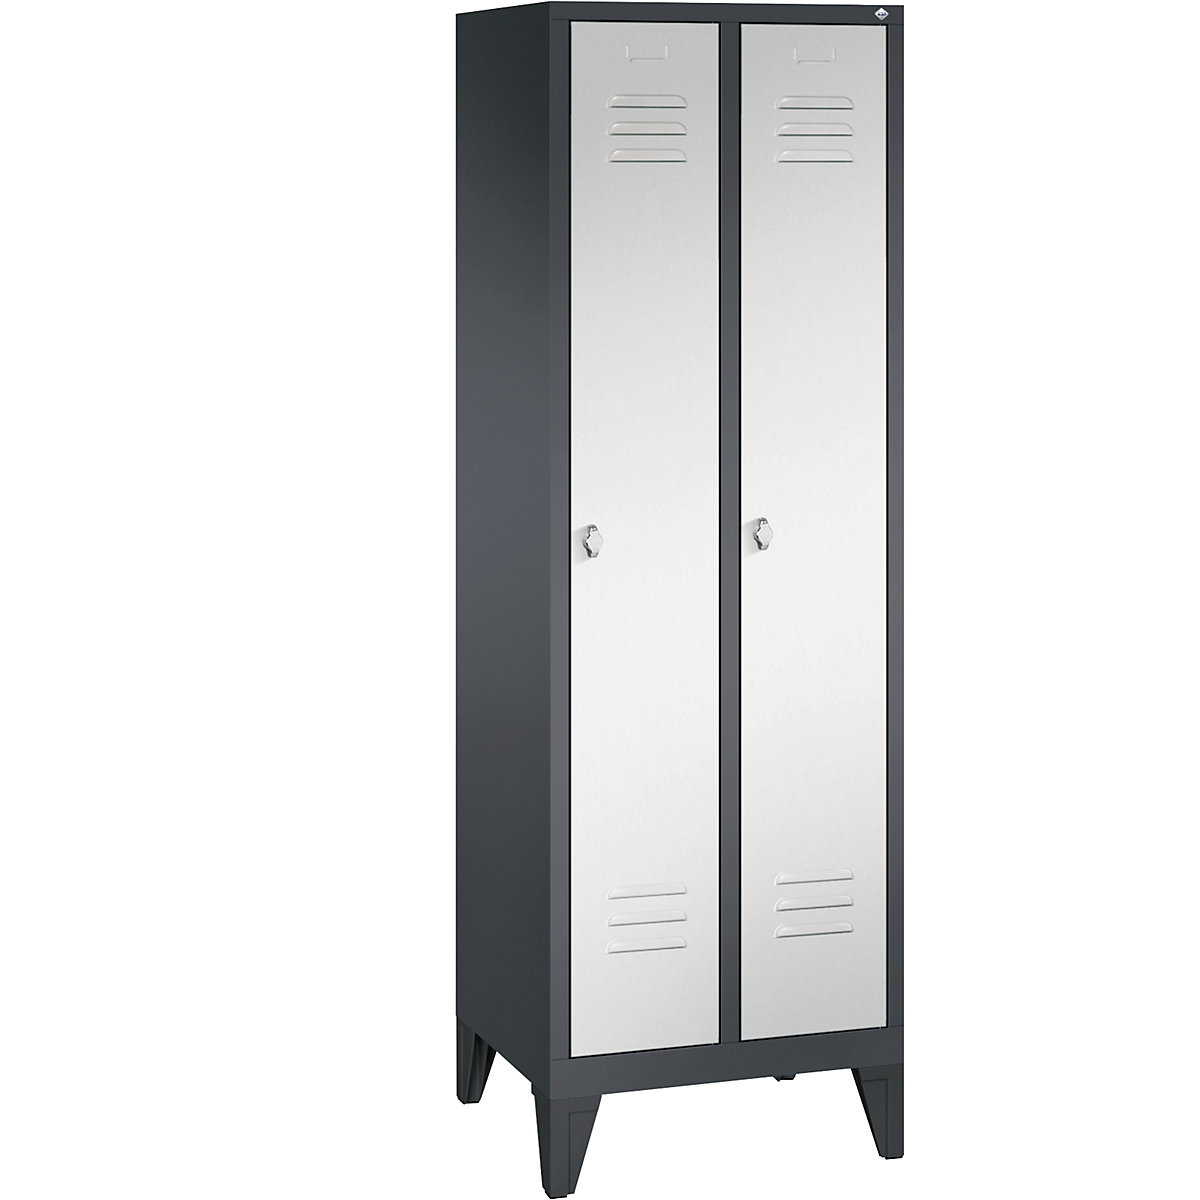 CLASSIC storage cupboard with feet – C+P, 2 compartments, compartment width 300 mm, black grey / light grey-8